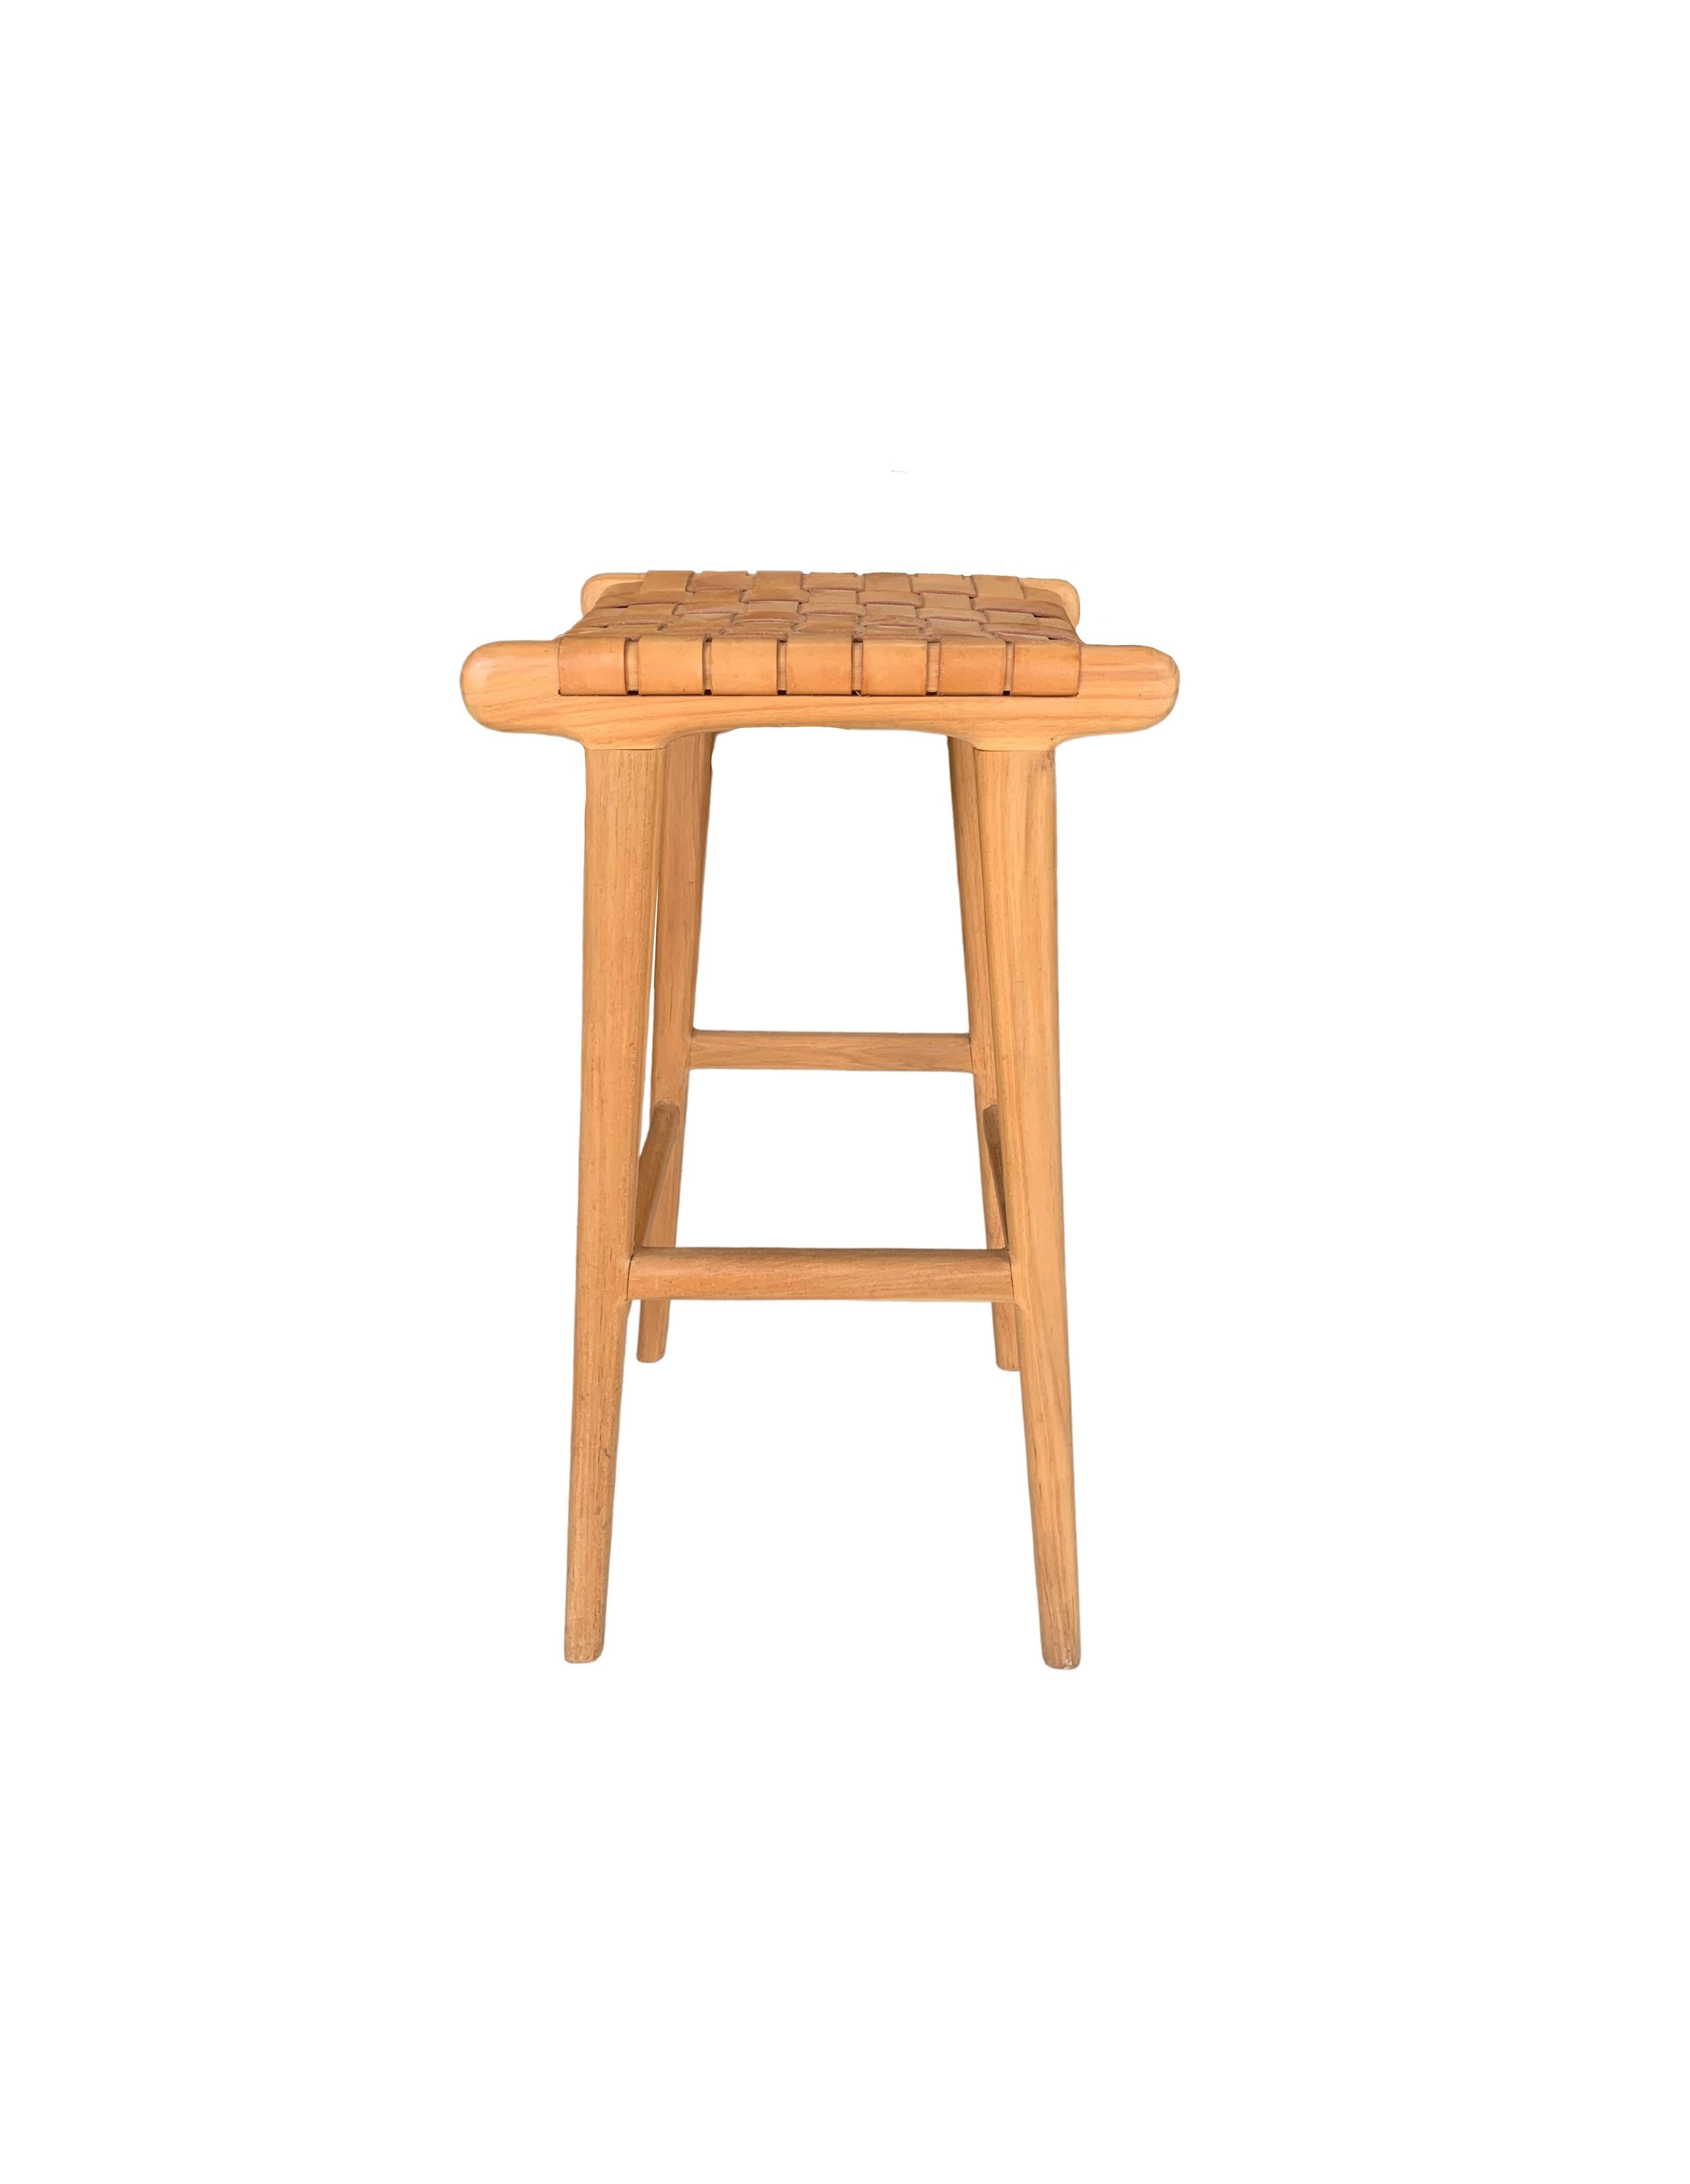 Modern Teak Wood Framed Stool with Woven Leather Seat